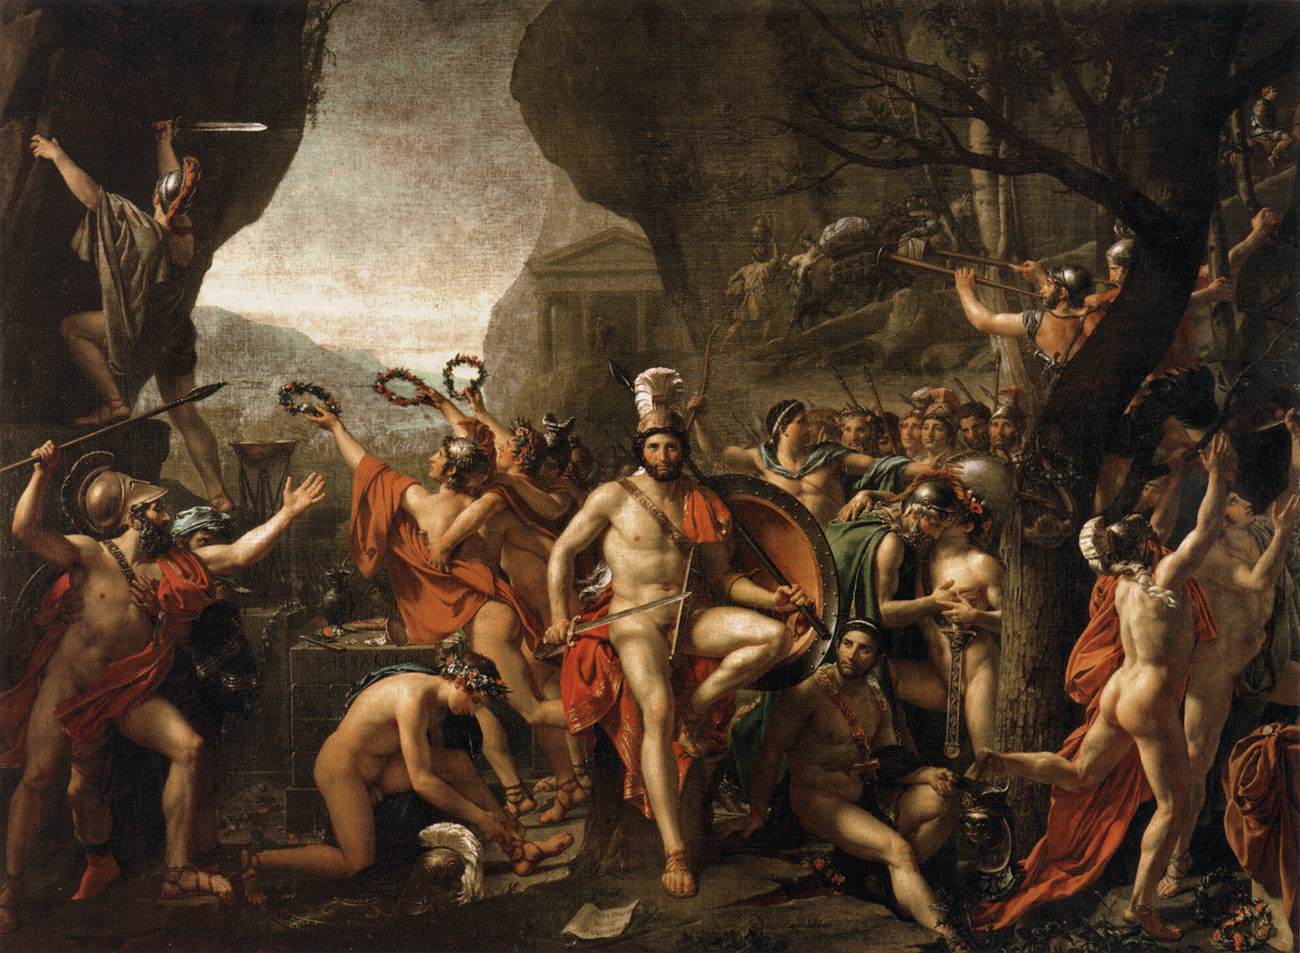 Leonidas in Thermopylae by Jacques-Louis David - 1814 - 395 x 531 cm 